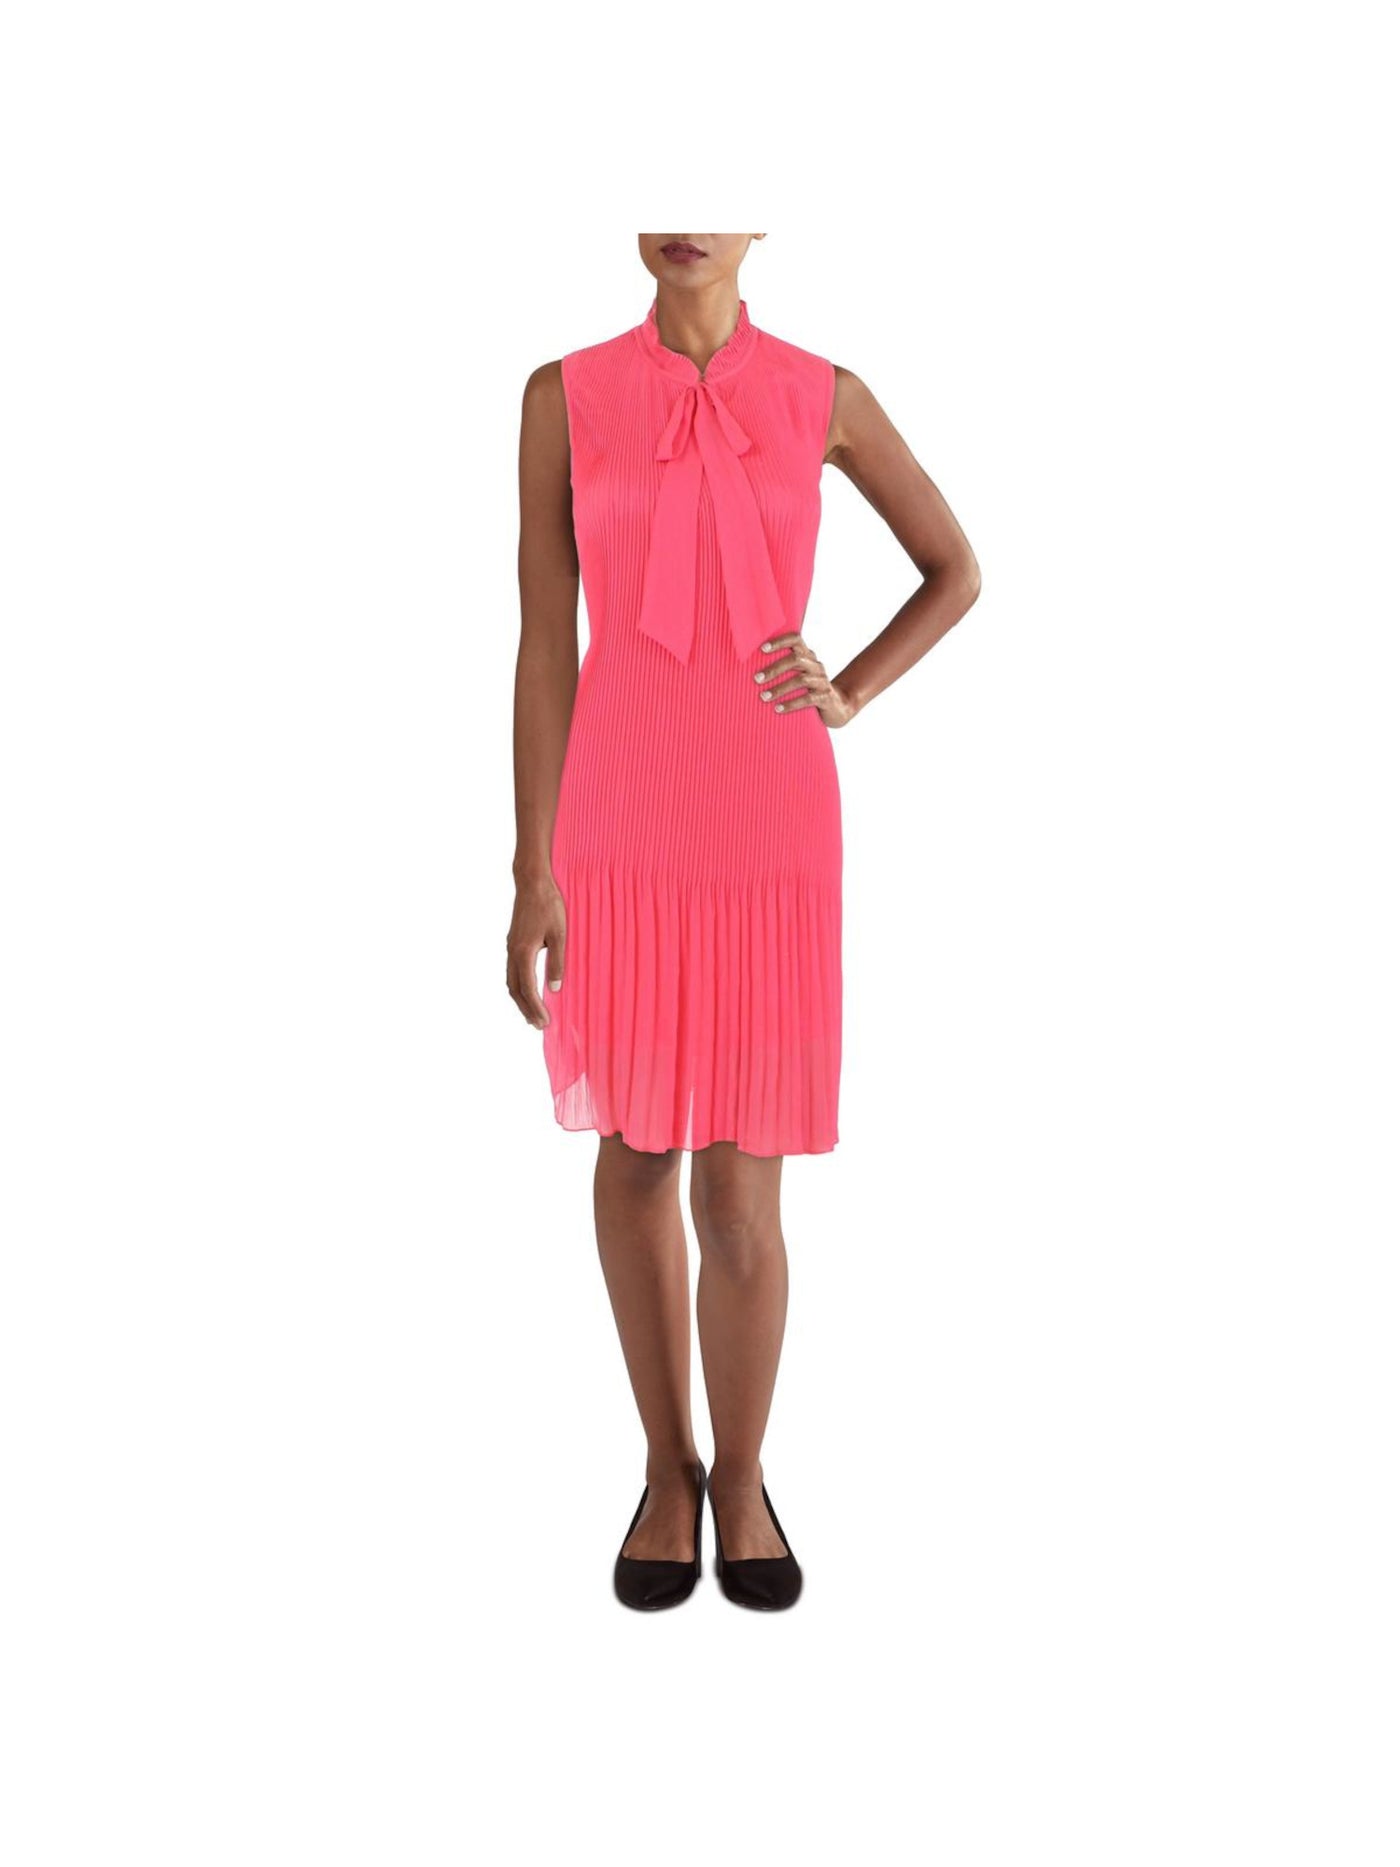 DKNY Womens Coral Pleated Sheer Lined Sleeveless Tie Neck Above The Knee Wear To Work Shift Dress 2